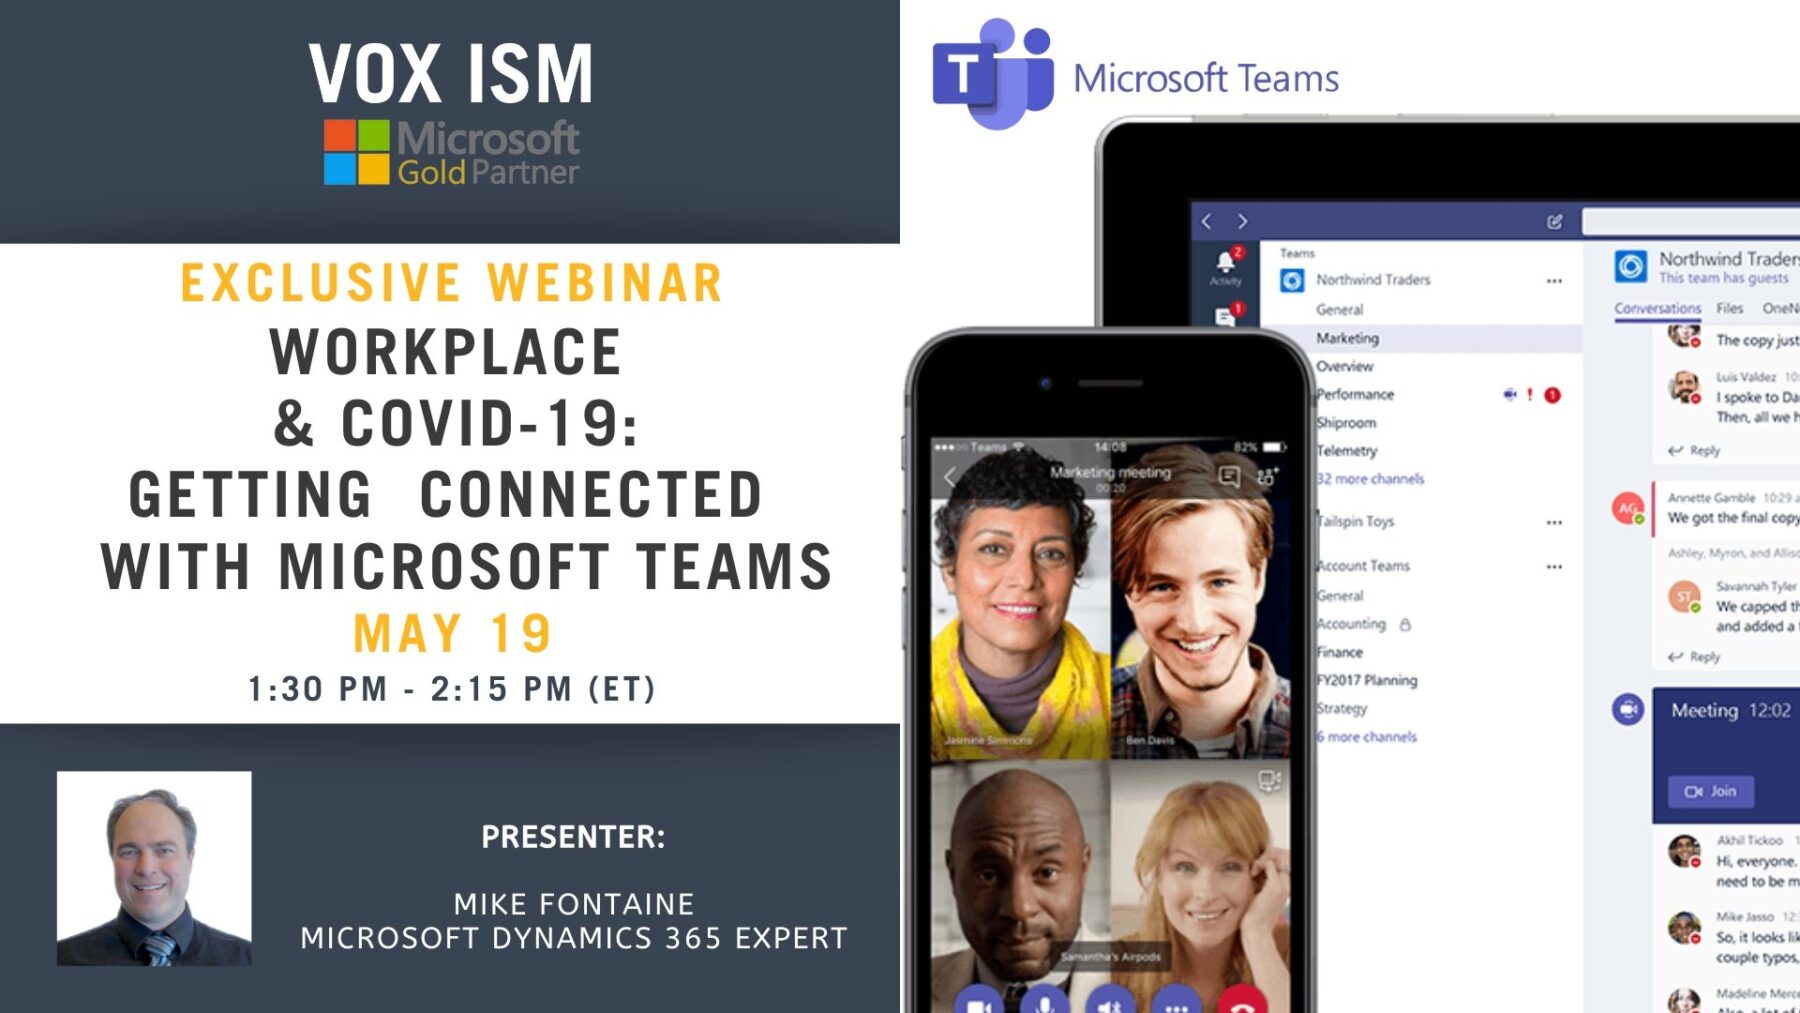 Workplace & COVID-19 - Getting Connected with Microsoft Teams - May 19 - Webinar VOX ISM